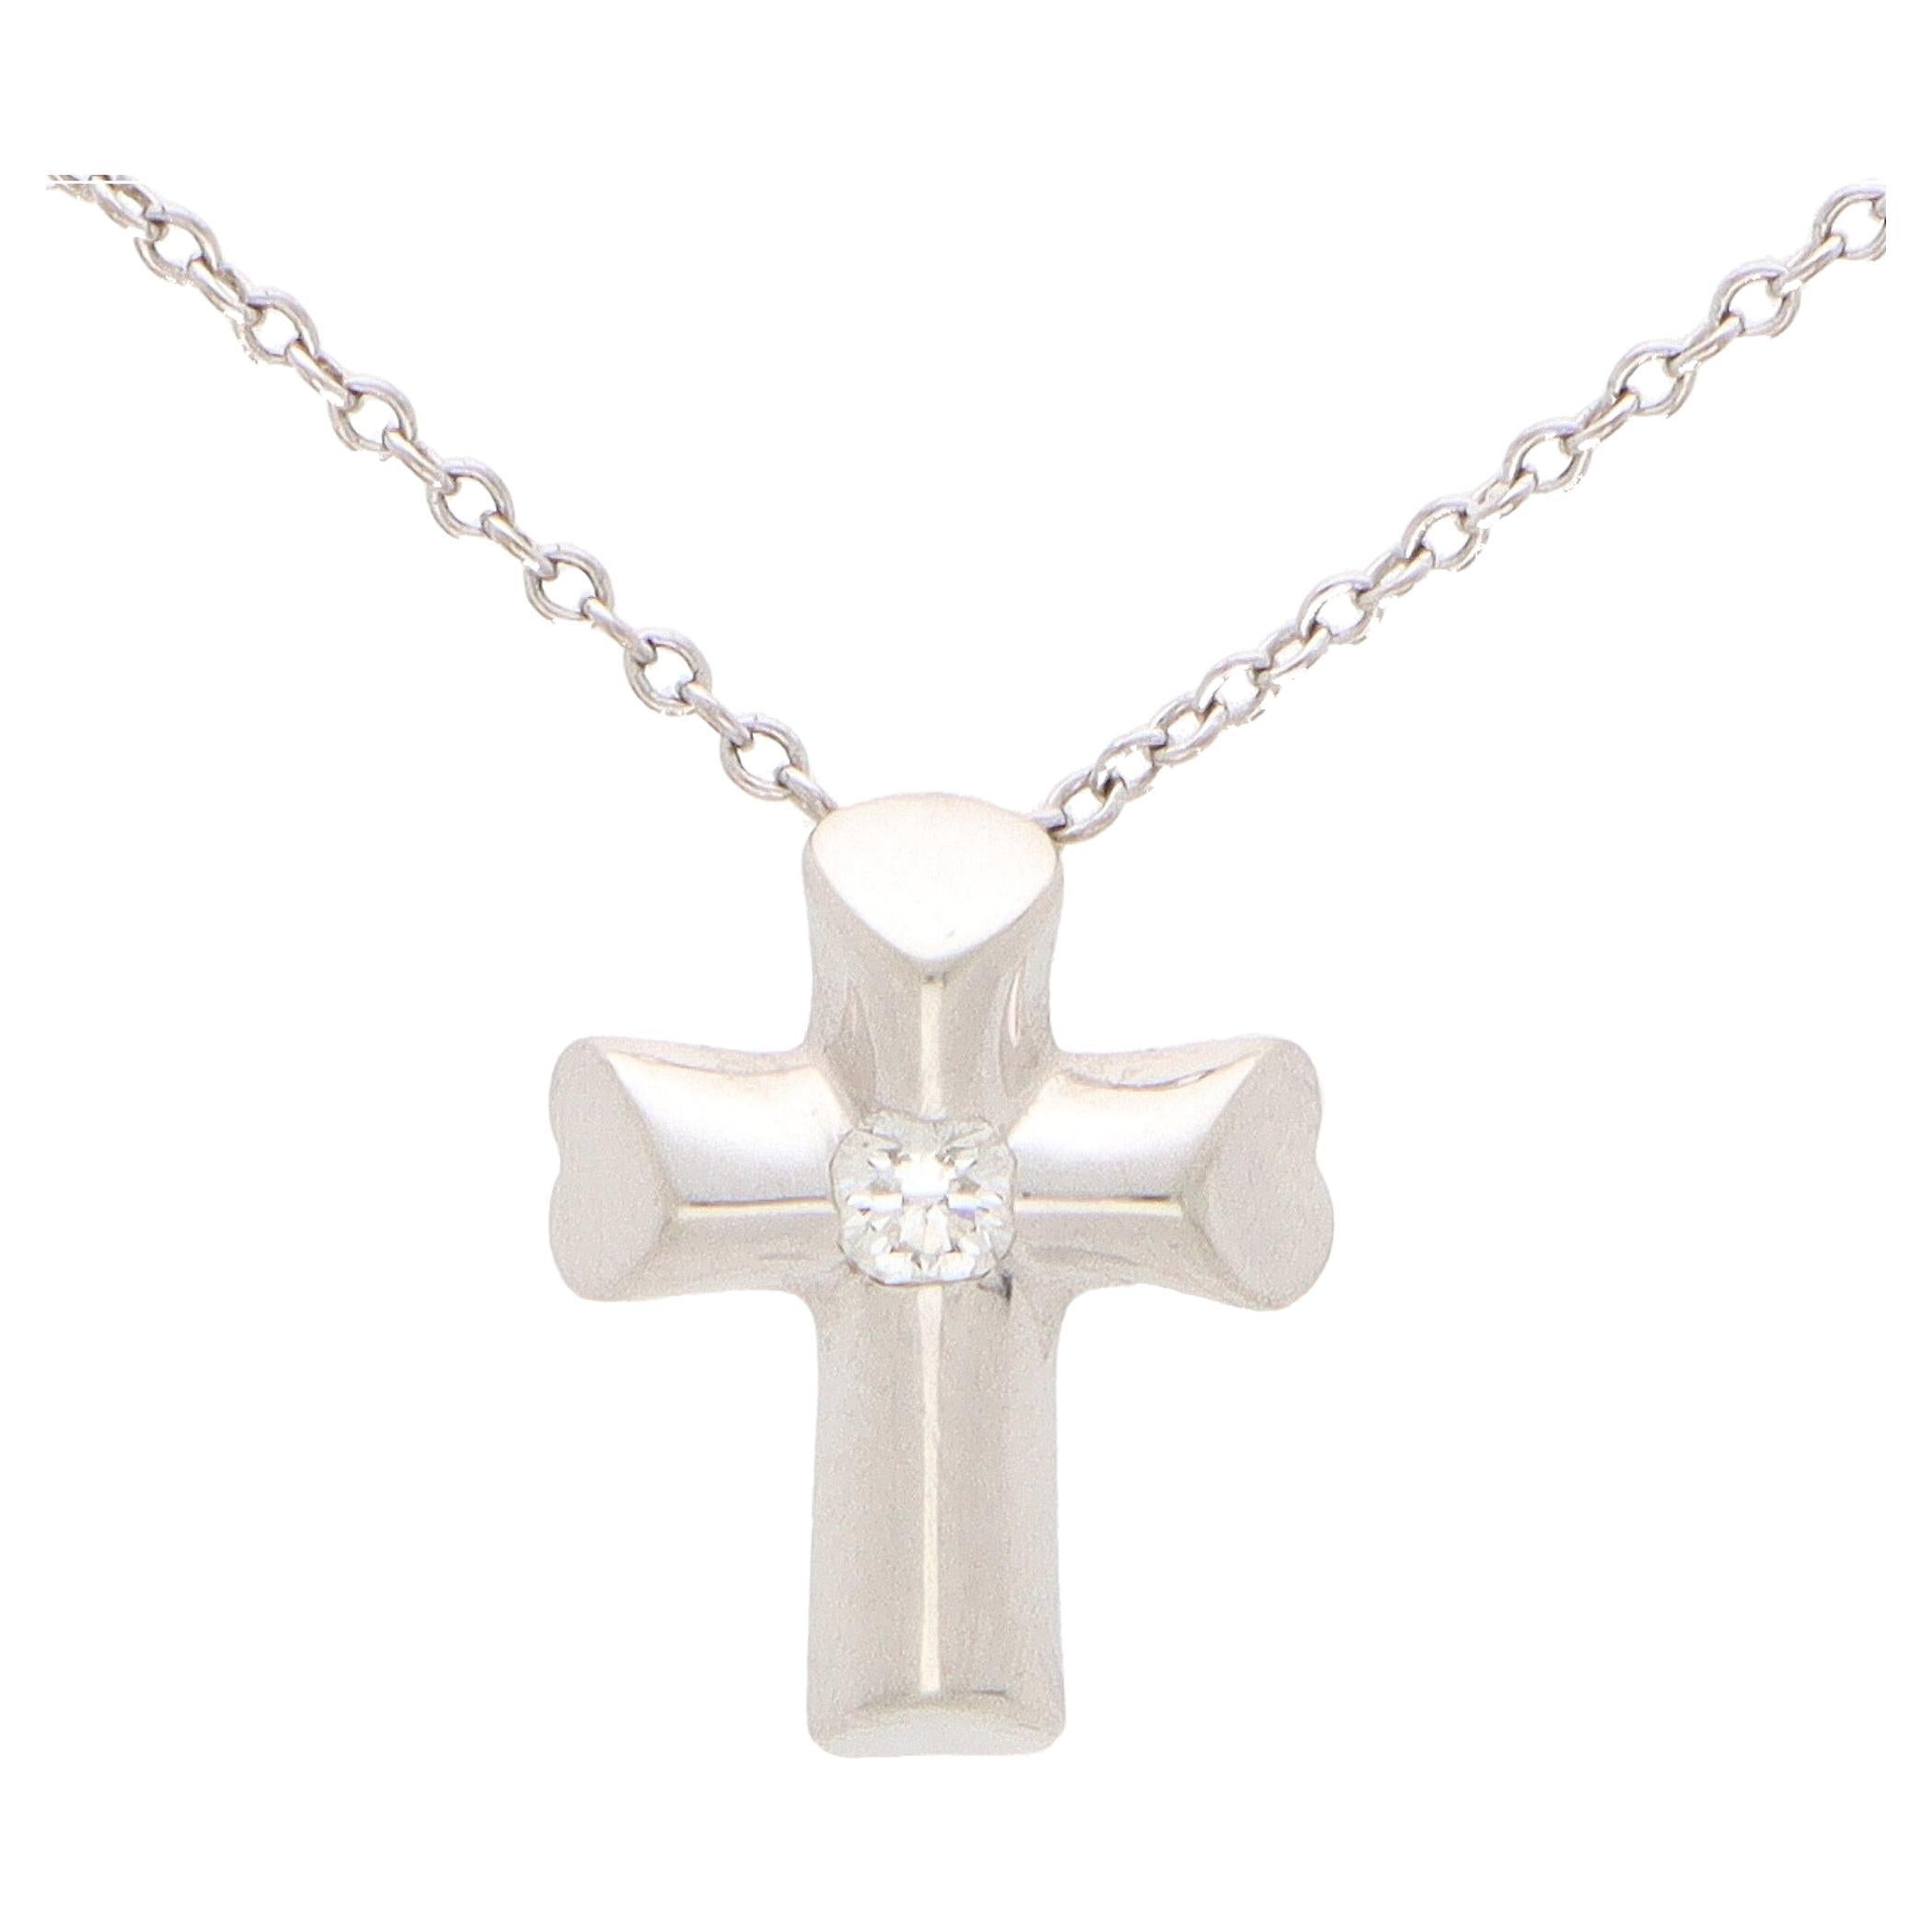 Vintage Paloma Picasso for Tiffany & Co. Diamond Cross Necklace